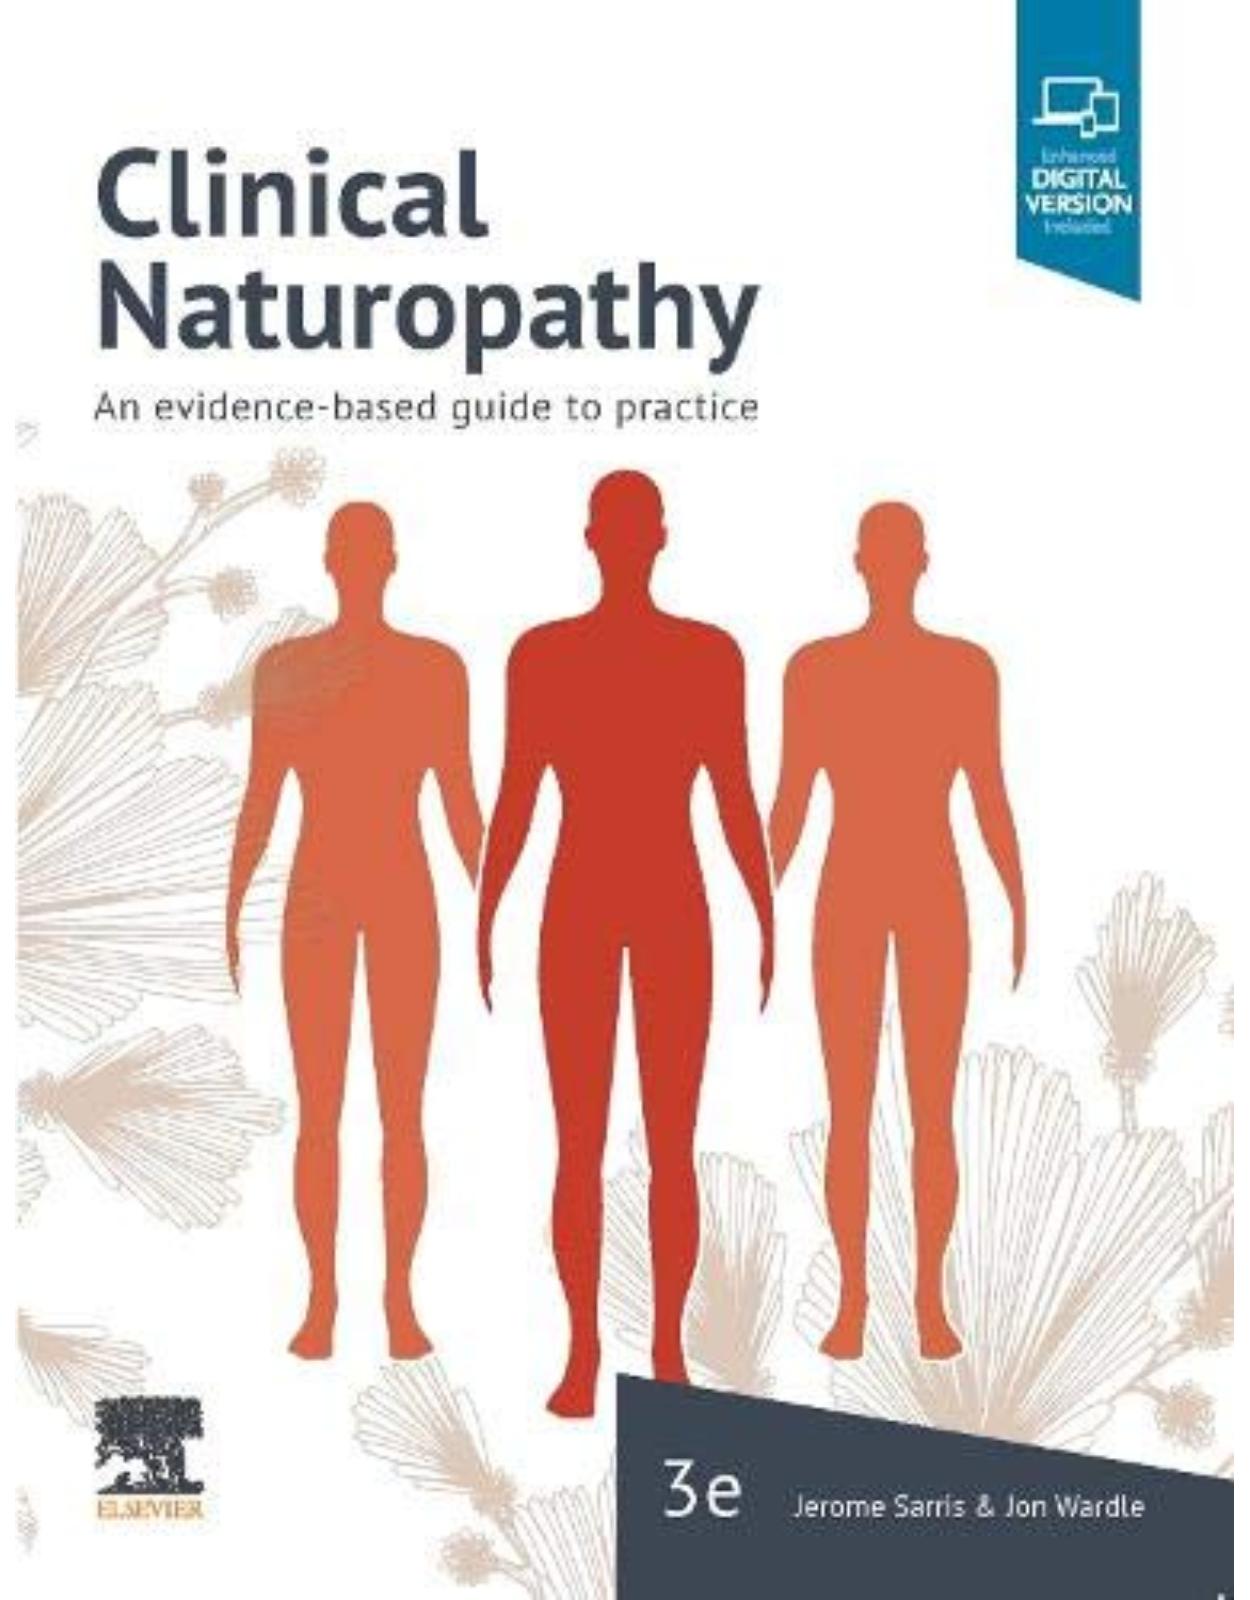 Clinical Naturopathy: An evidence-based guide to practice, 3e